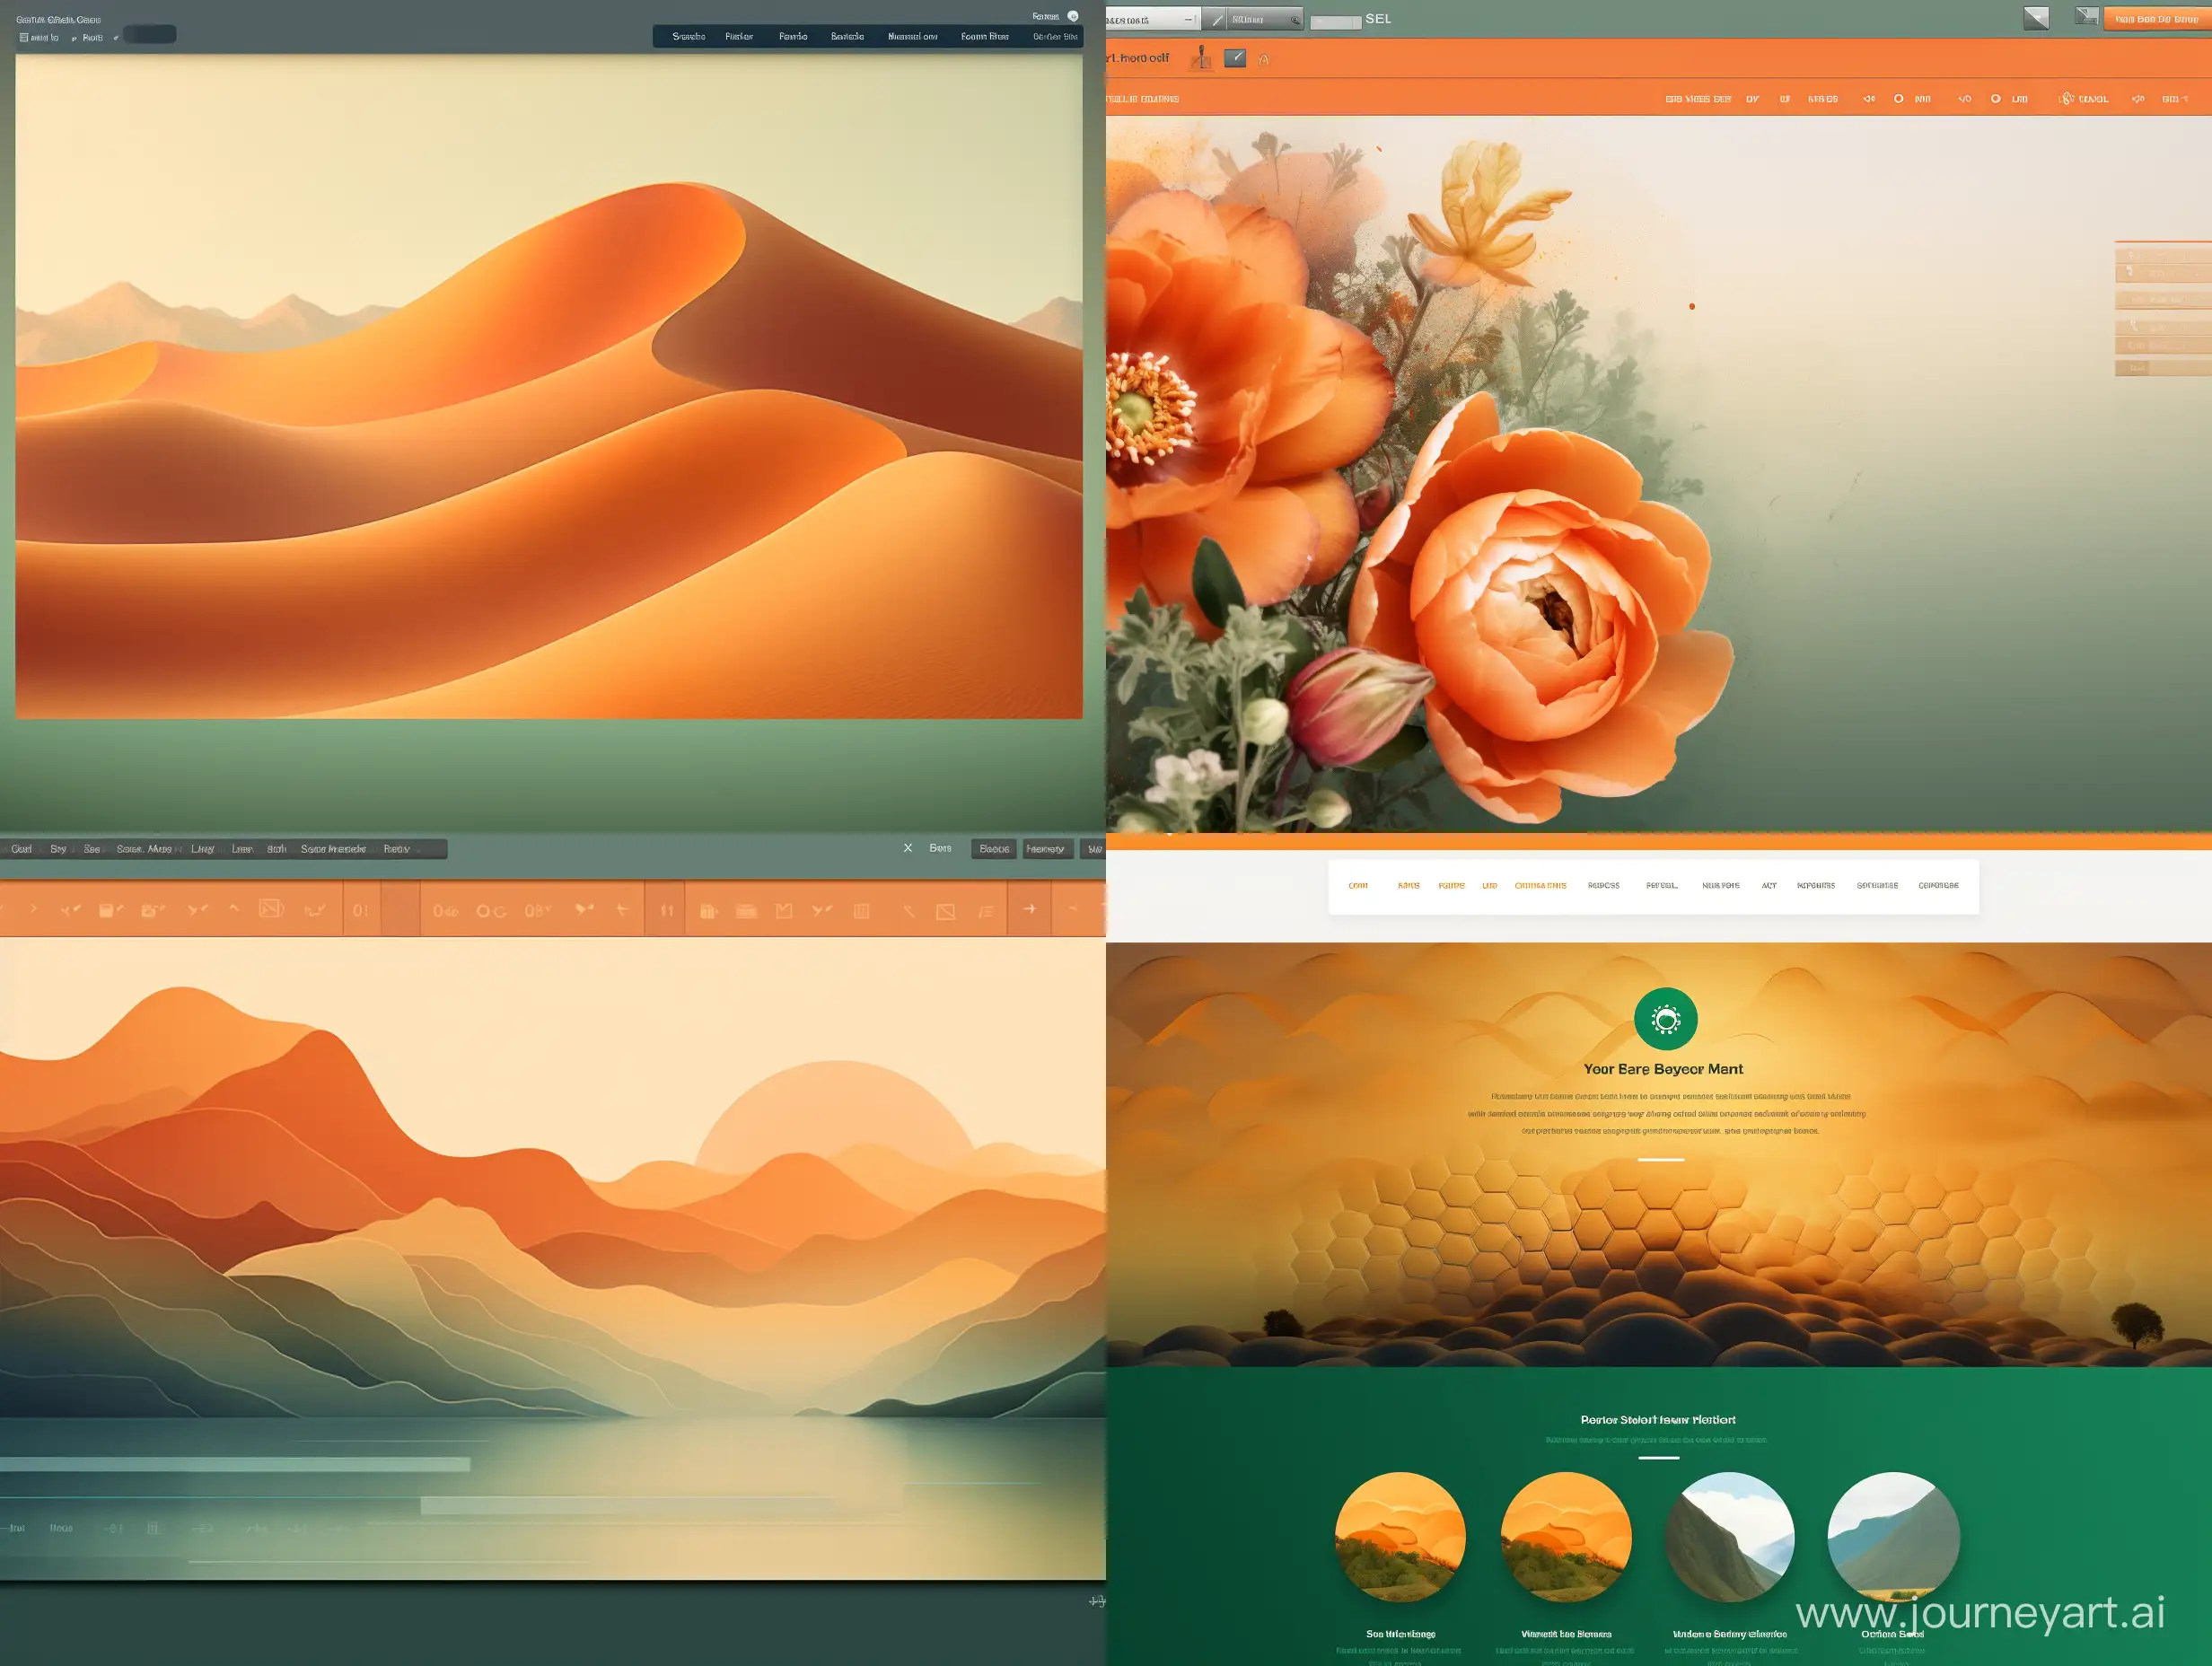 Create a high-resolution, wide-format banner image that features a finely textured, noise-like gradient. The gradient should smoothly transition from a warm green hue (hex #9ACD32) on the left, through a rich golden color (hex #FFD700) towards the center, to the website's primary orange color (hex #E9843C) and then blend into a soft pink (hex #FFC0CB) on the right. The image should evoke a retro film grain texture and be designed to complement a contemporary website with a warm and inviting color scheme.